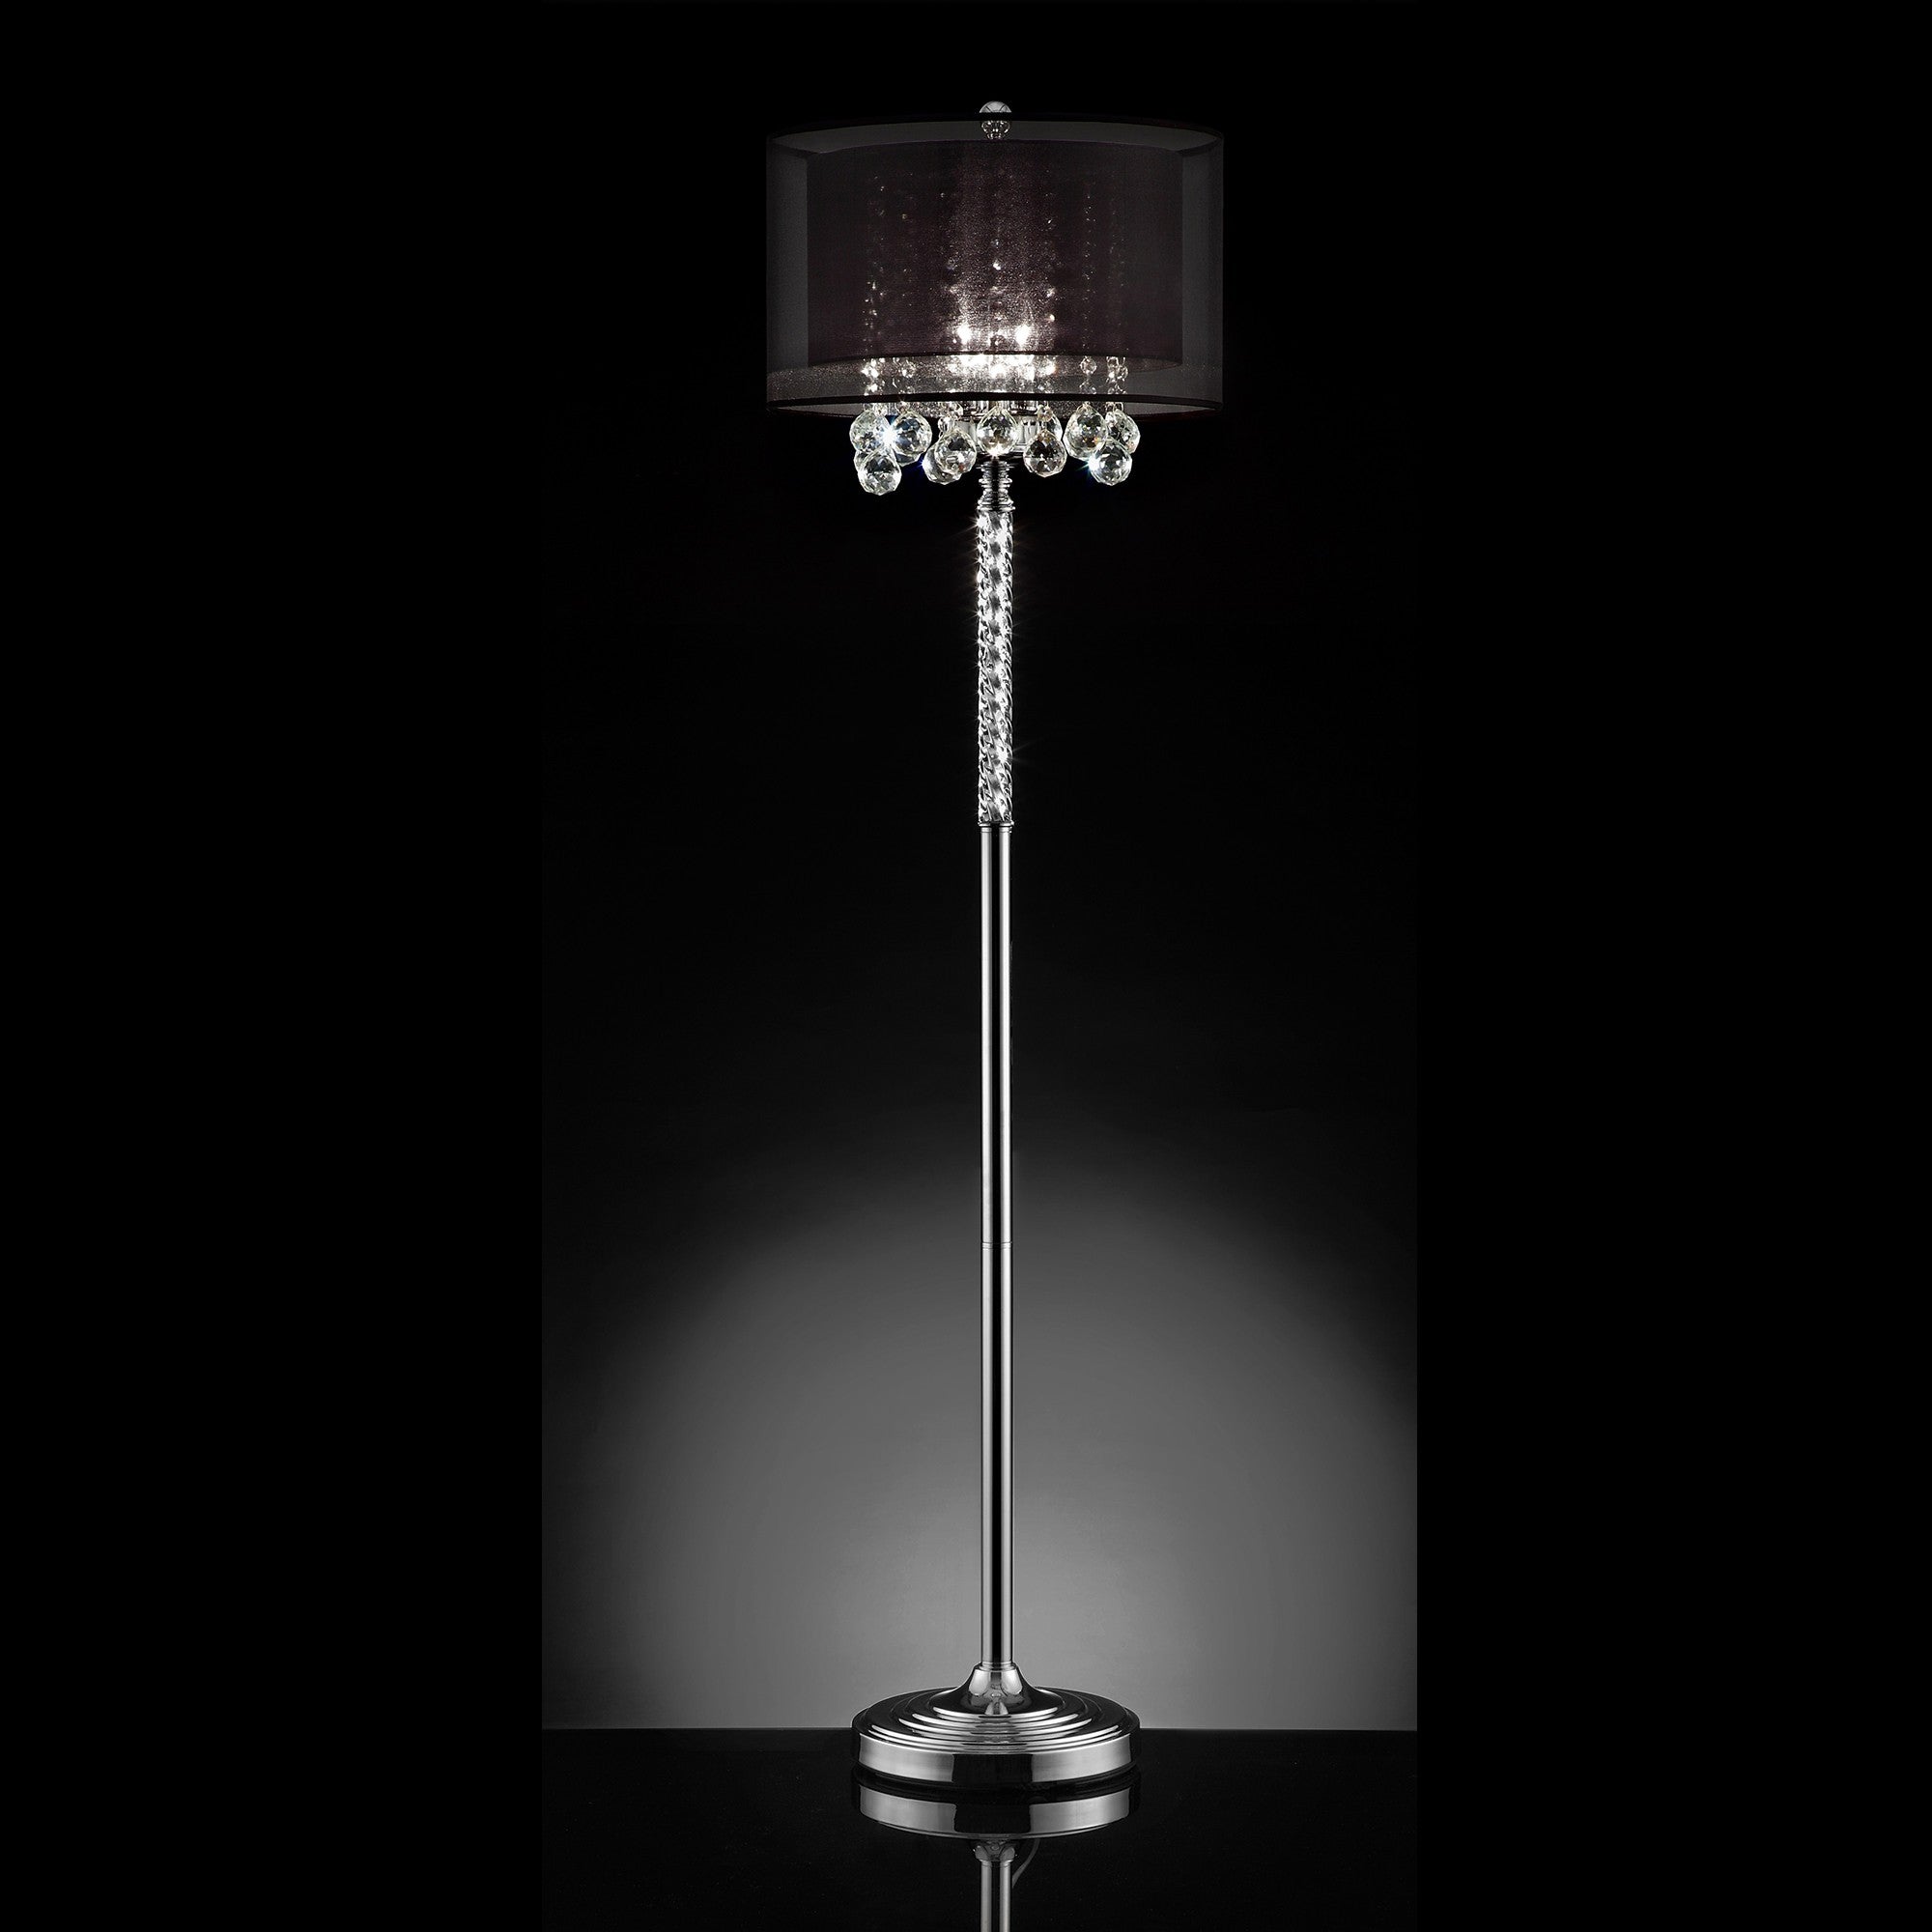 Contempo Silver Floor Lamp with Black Shade and Crystal Accents